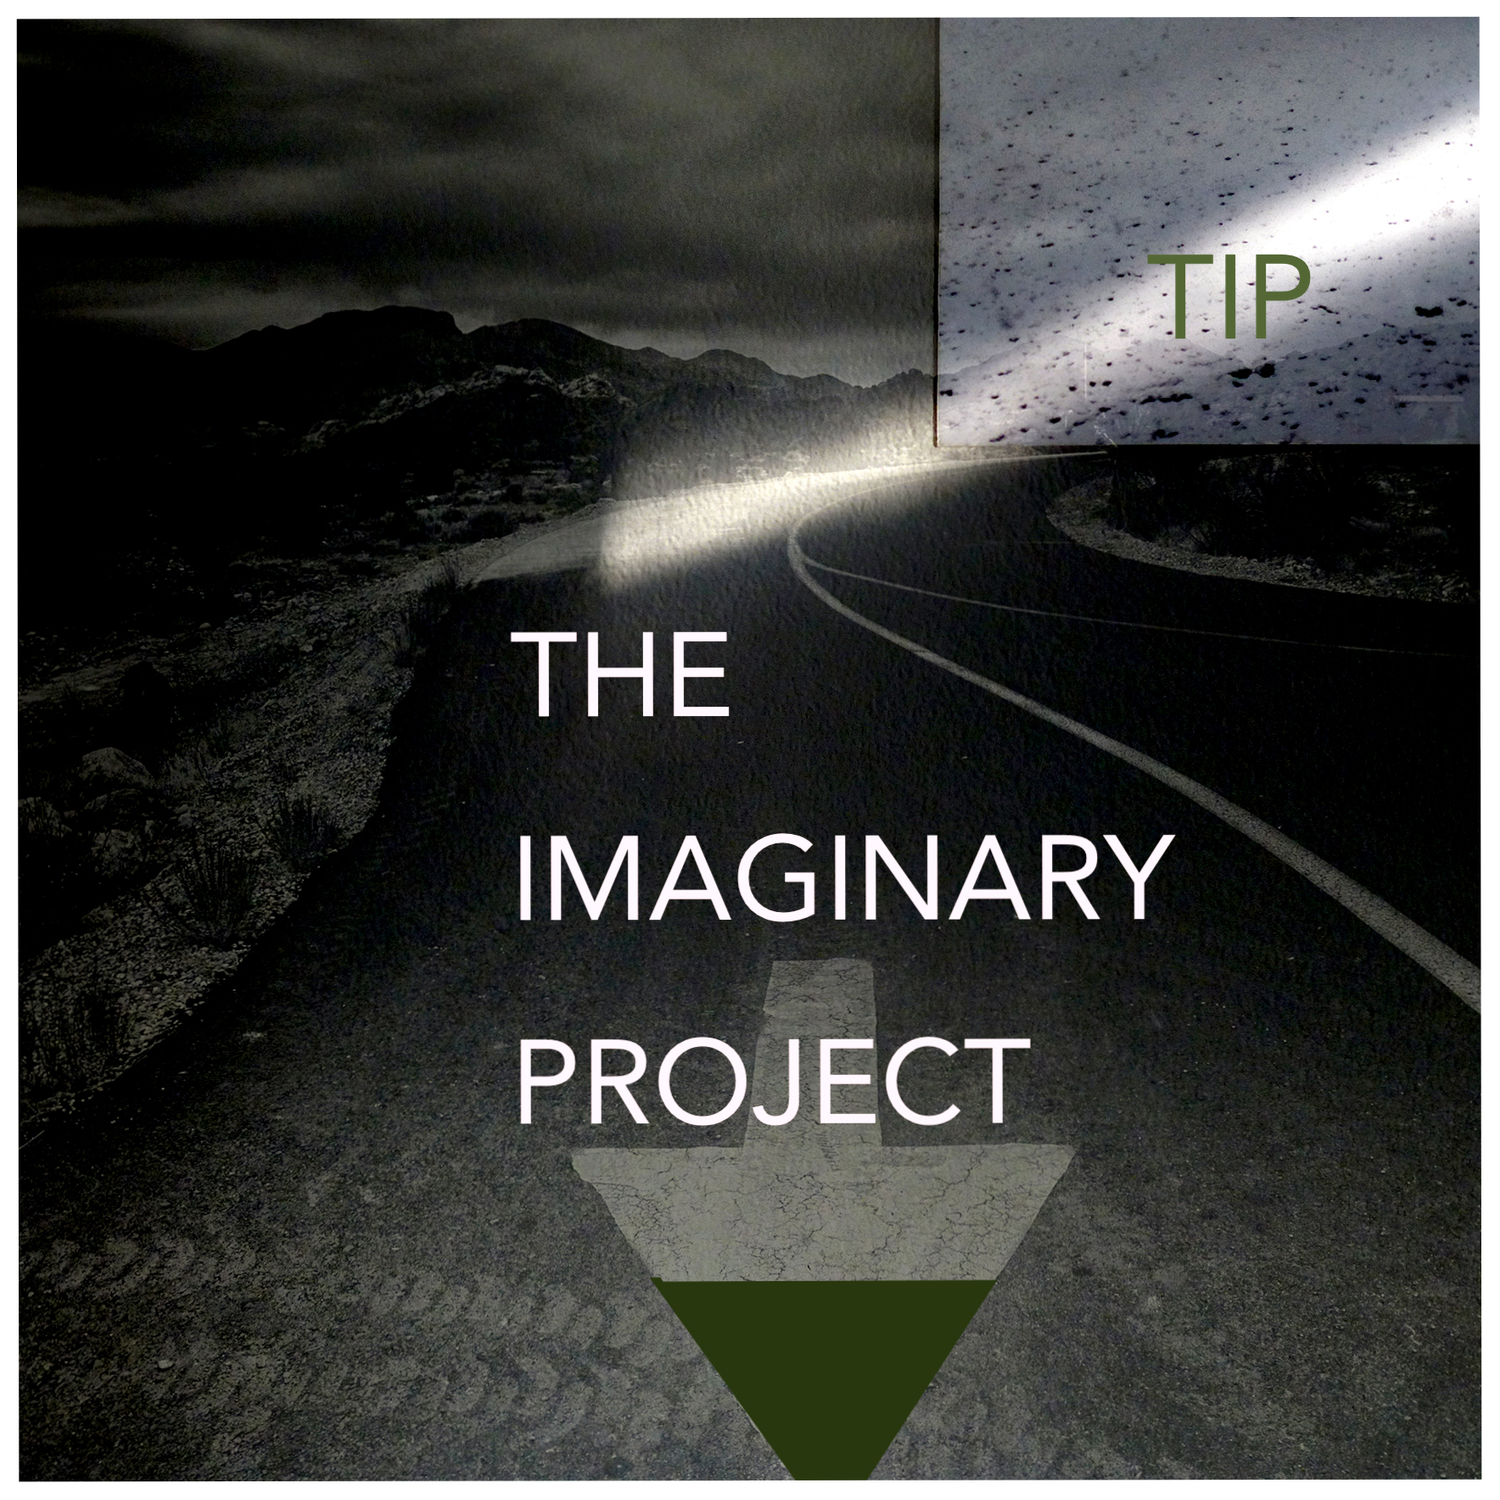 THE IMAGINARY PROJECT